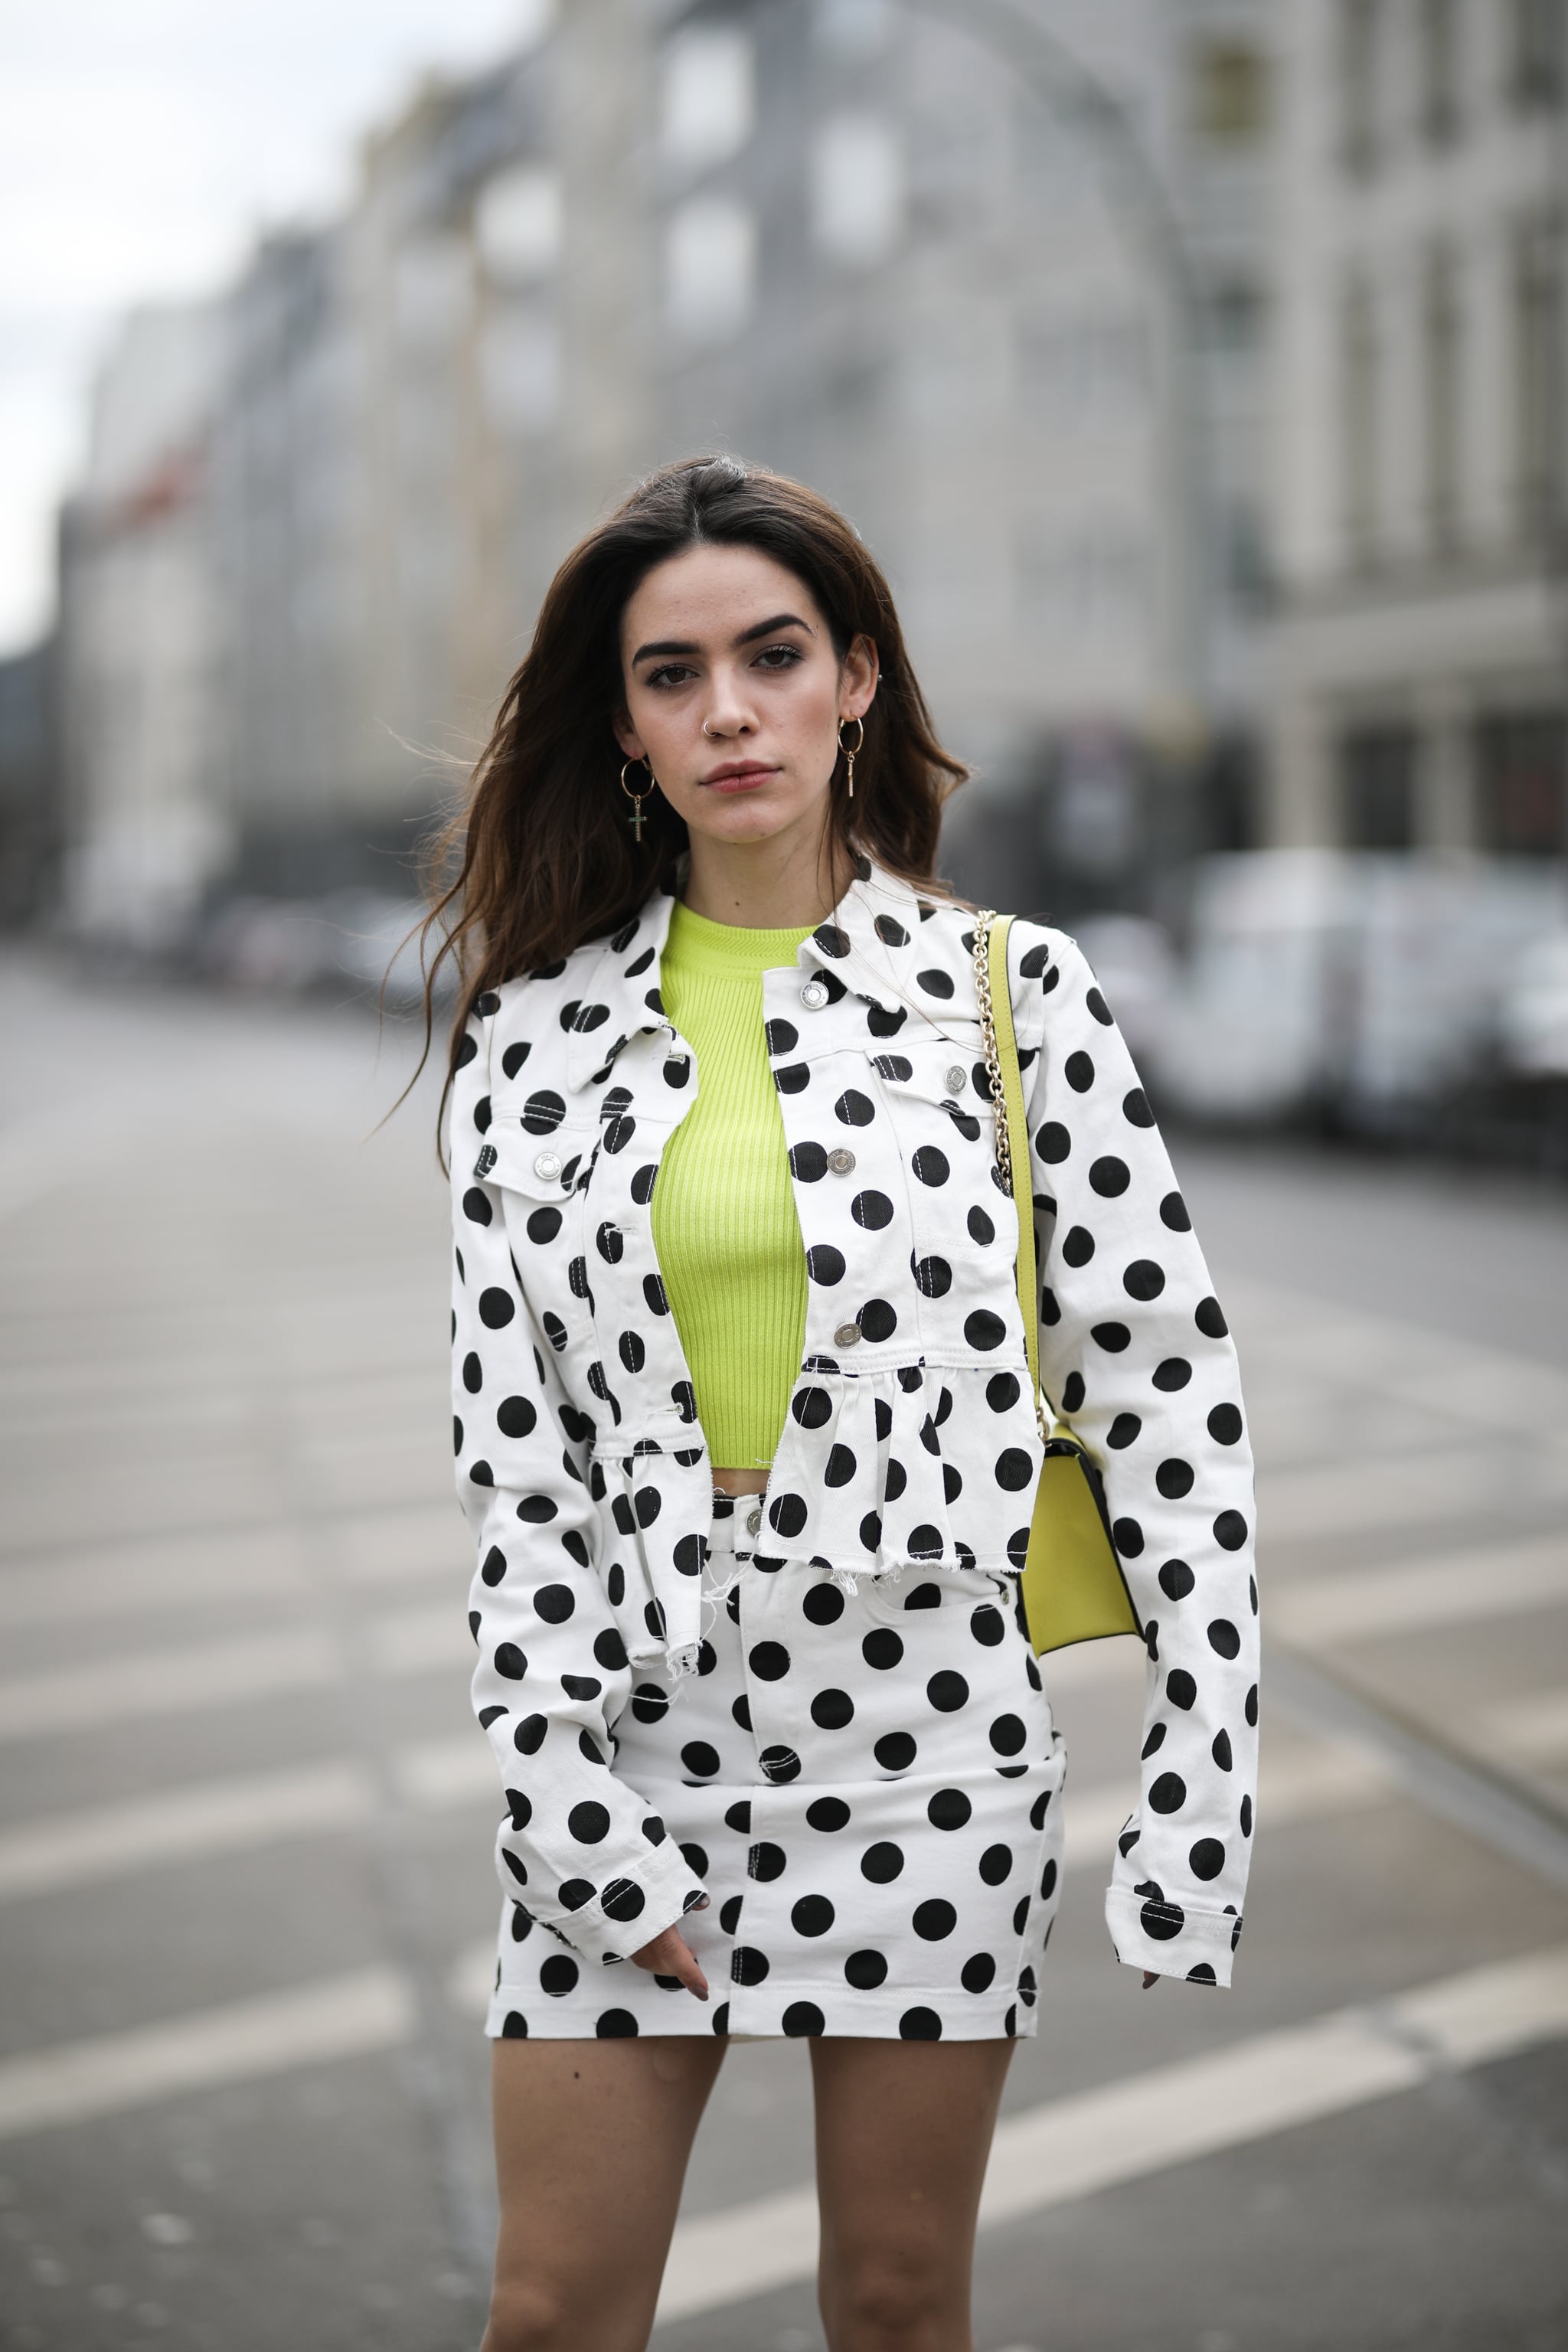 Shop this pic from @stephaniepernas  Polka dot shirt outfit, Fashion, Polka  dot top outfit